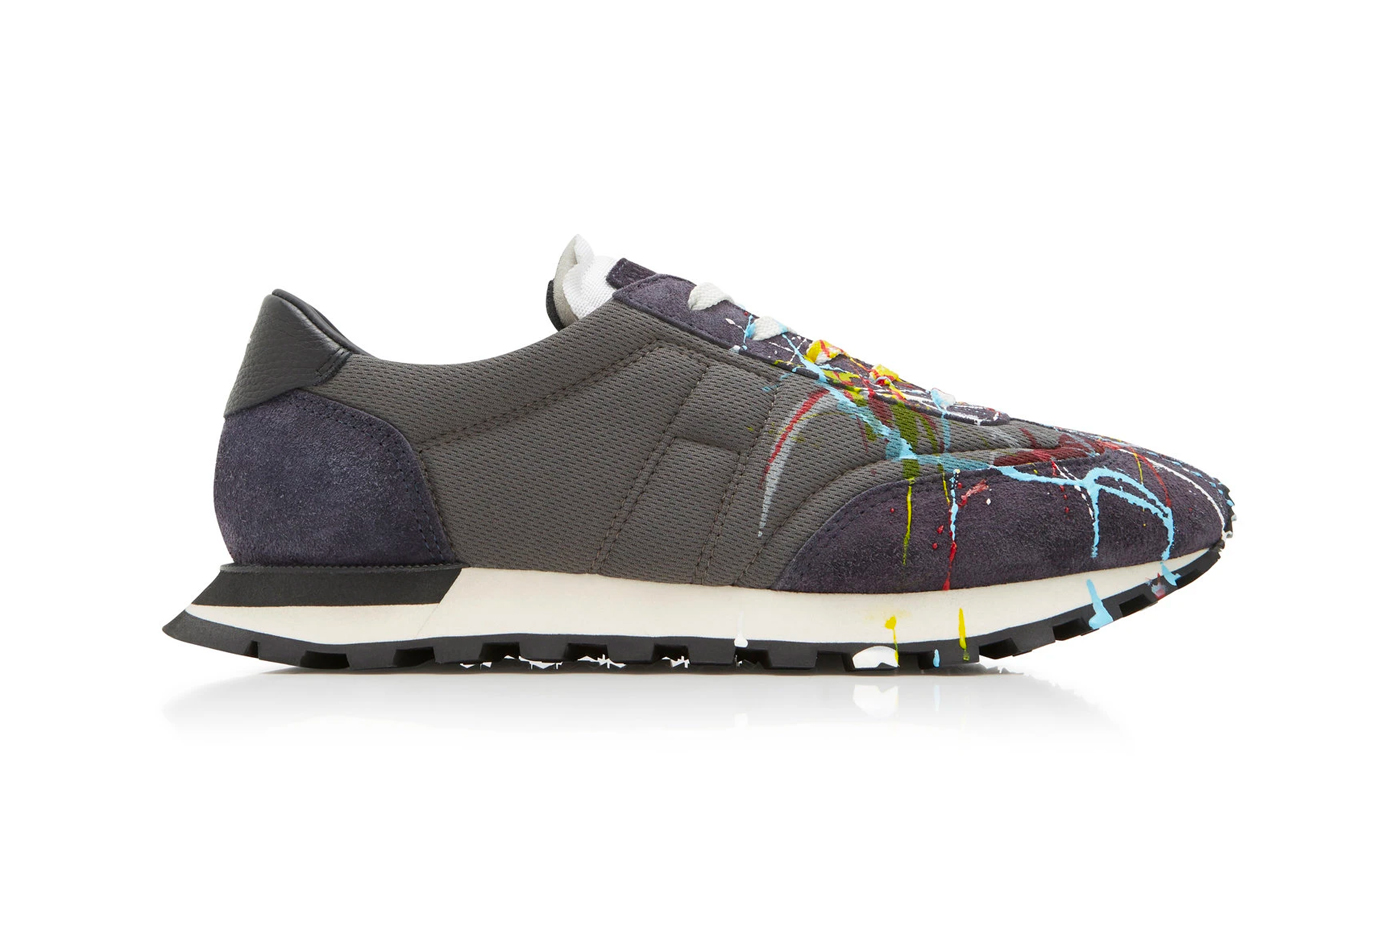 Maison Margiela Paint-Splattered Suede and Mesh Sneakers Release 